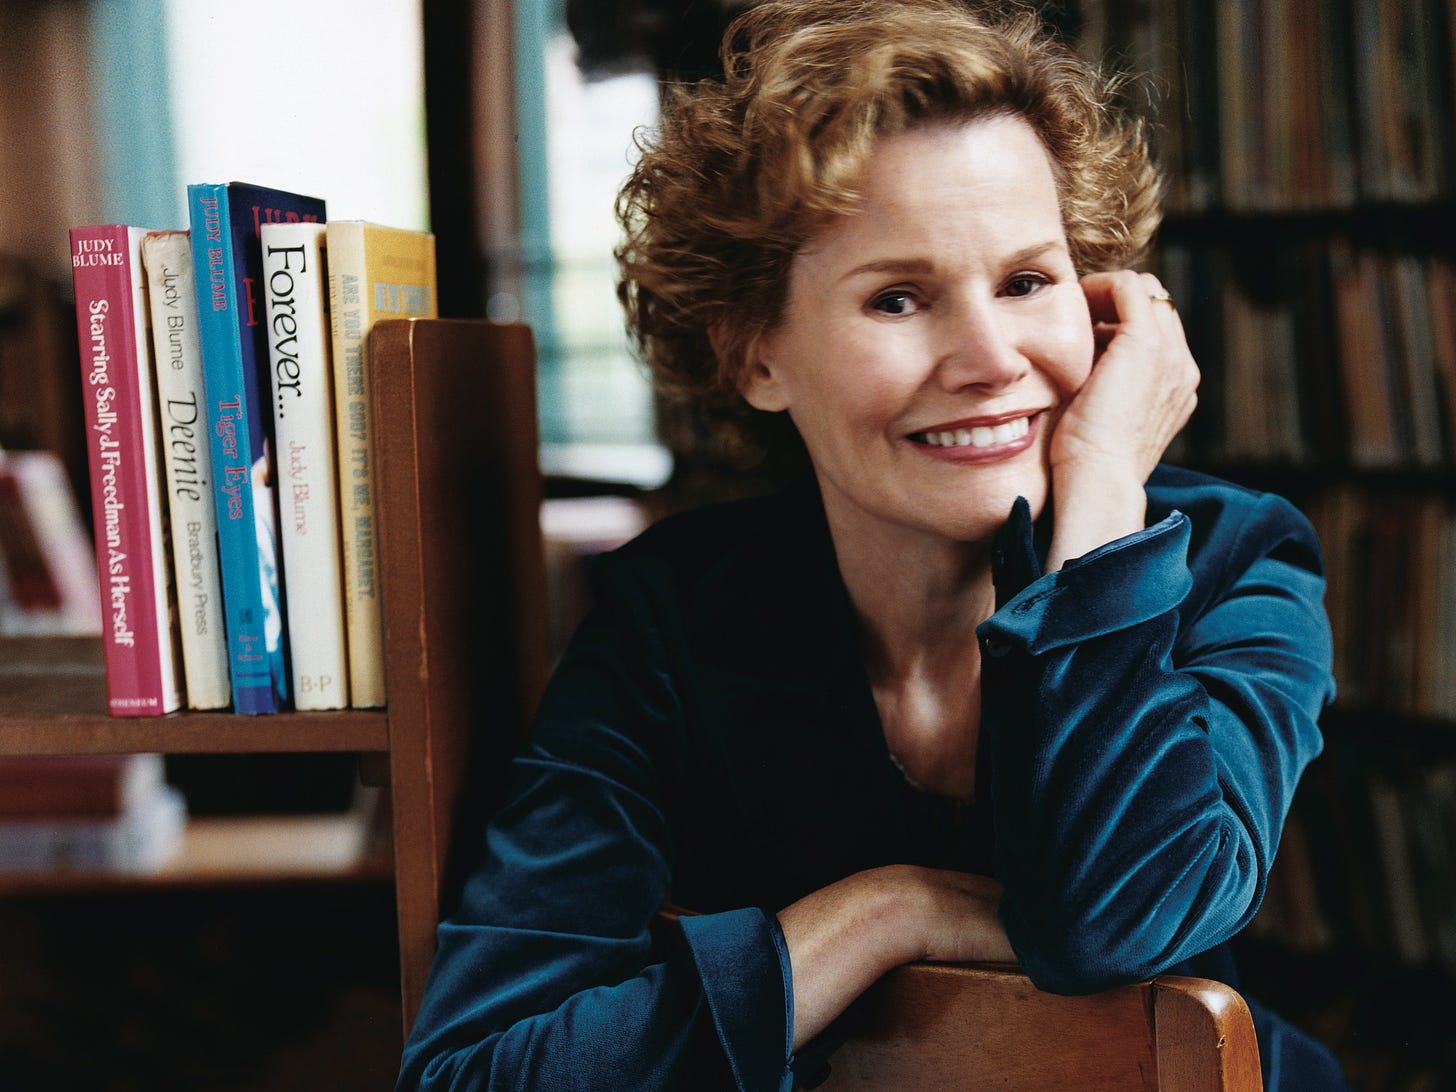 Dear Judy Blume': Writers Share How the Celebrated Author Inspired Them |  Glamour